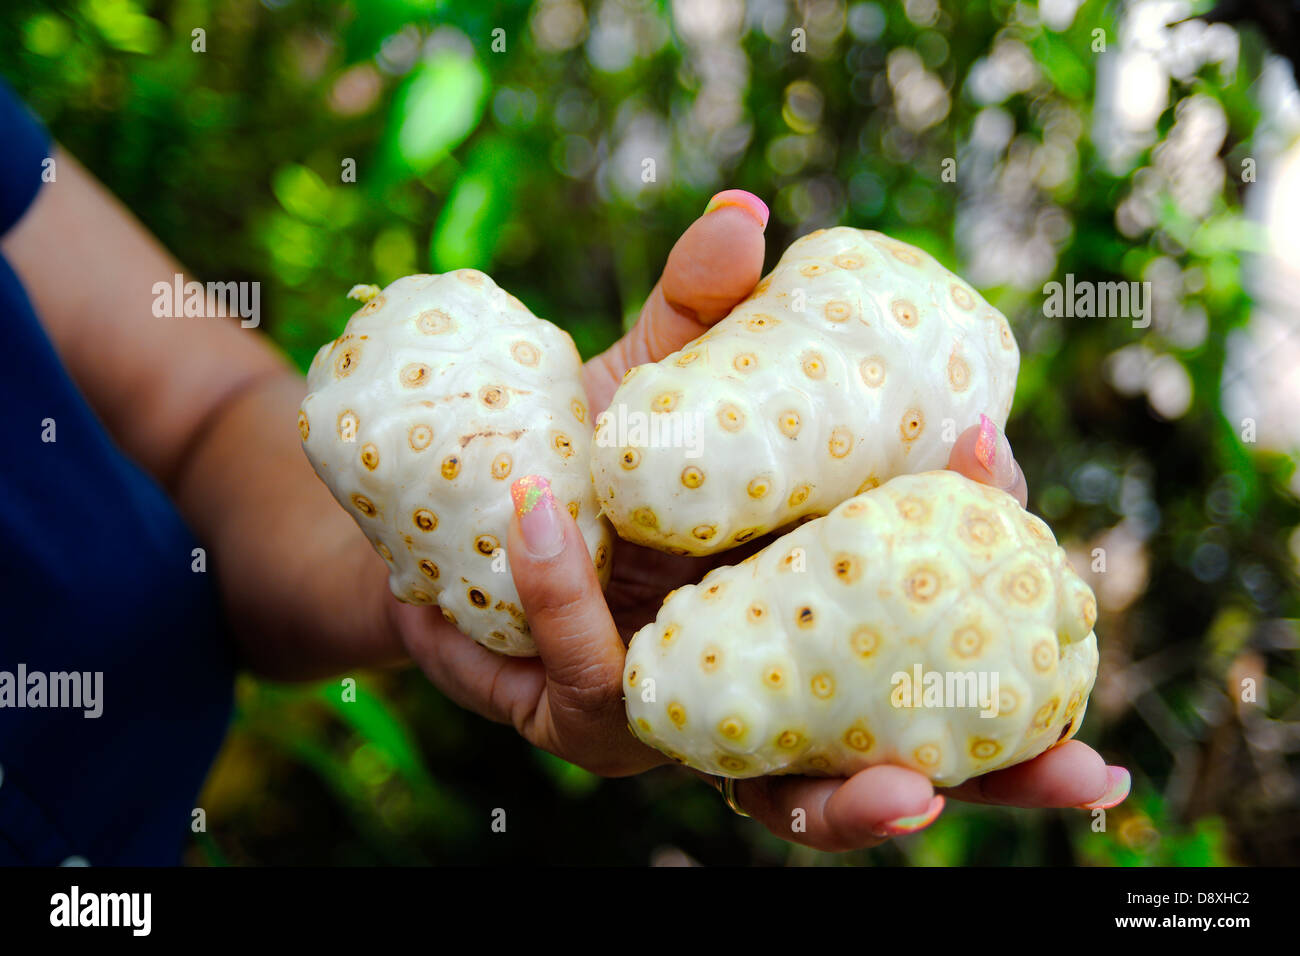 Woman holding Noni fruits (Morinda citrifolia) in her hands Stock Photo